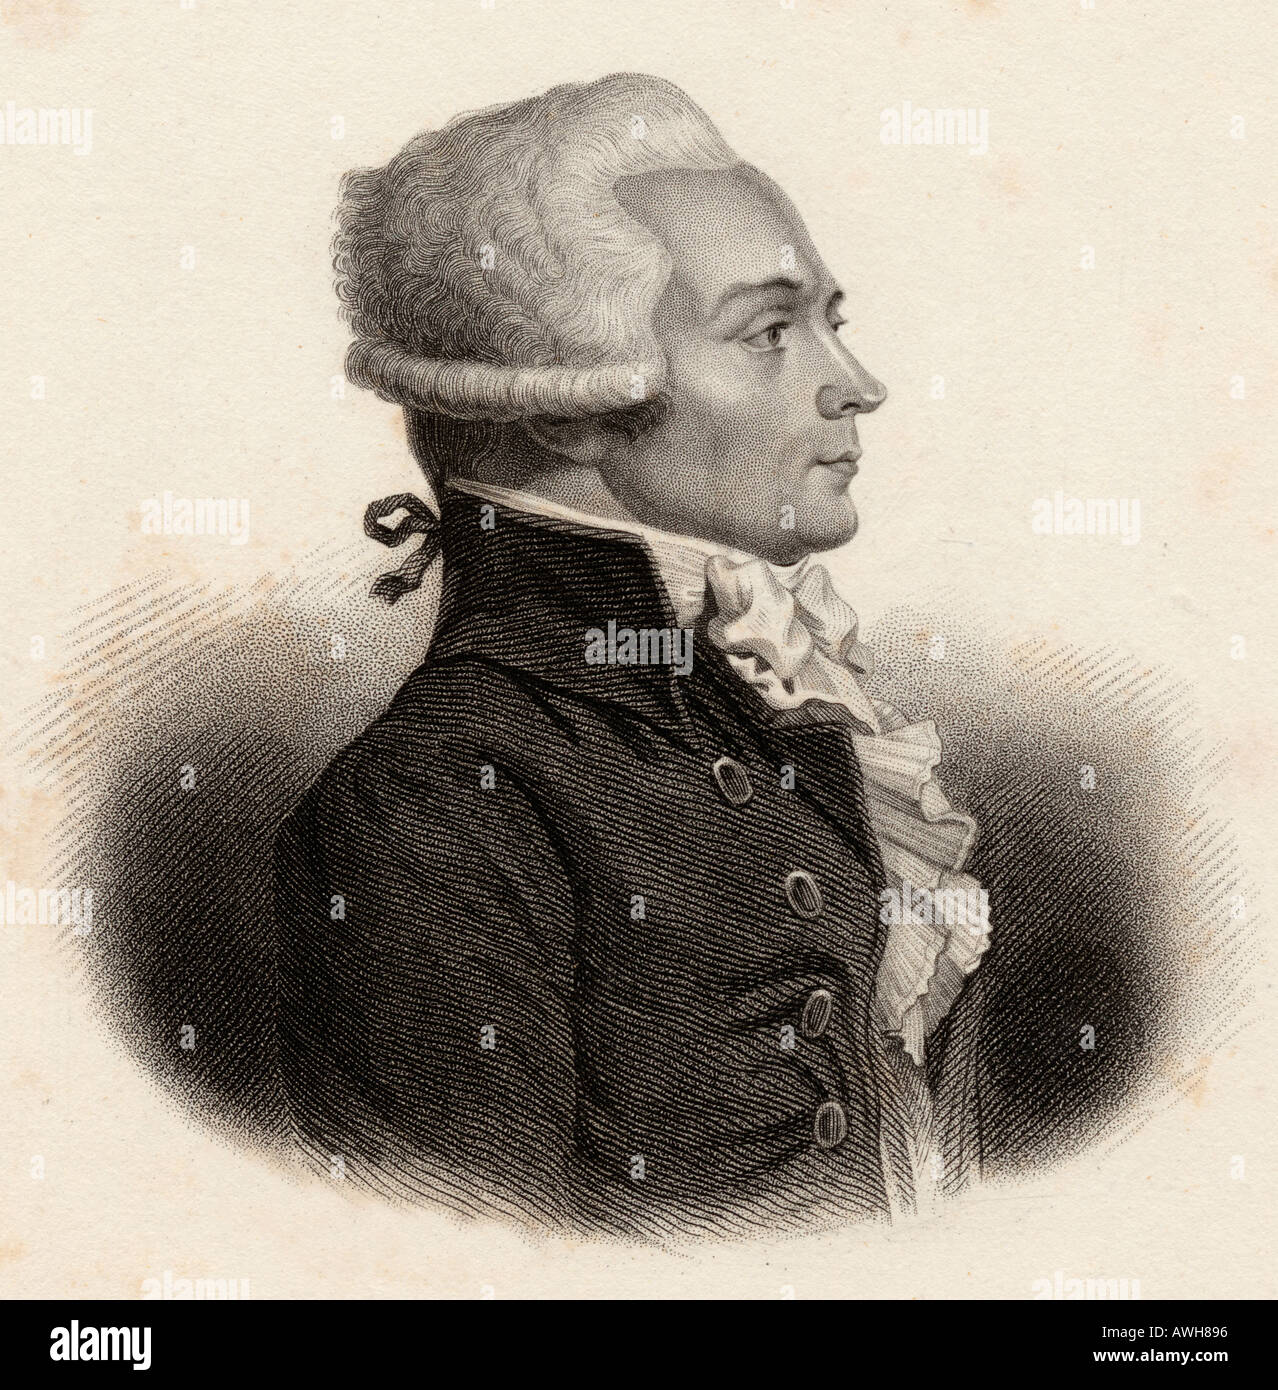 Maximilien Francois Marie Isidore de Robespierre, 1758 - 1794.  French lawyer, politician and Jacobin leader during French Revolution. Stock Photo